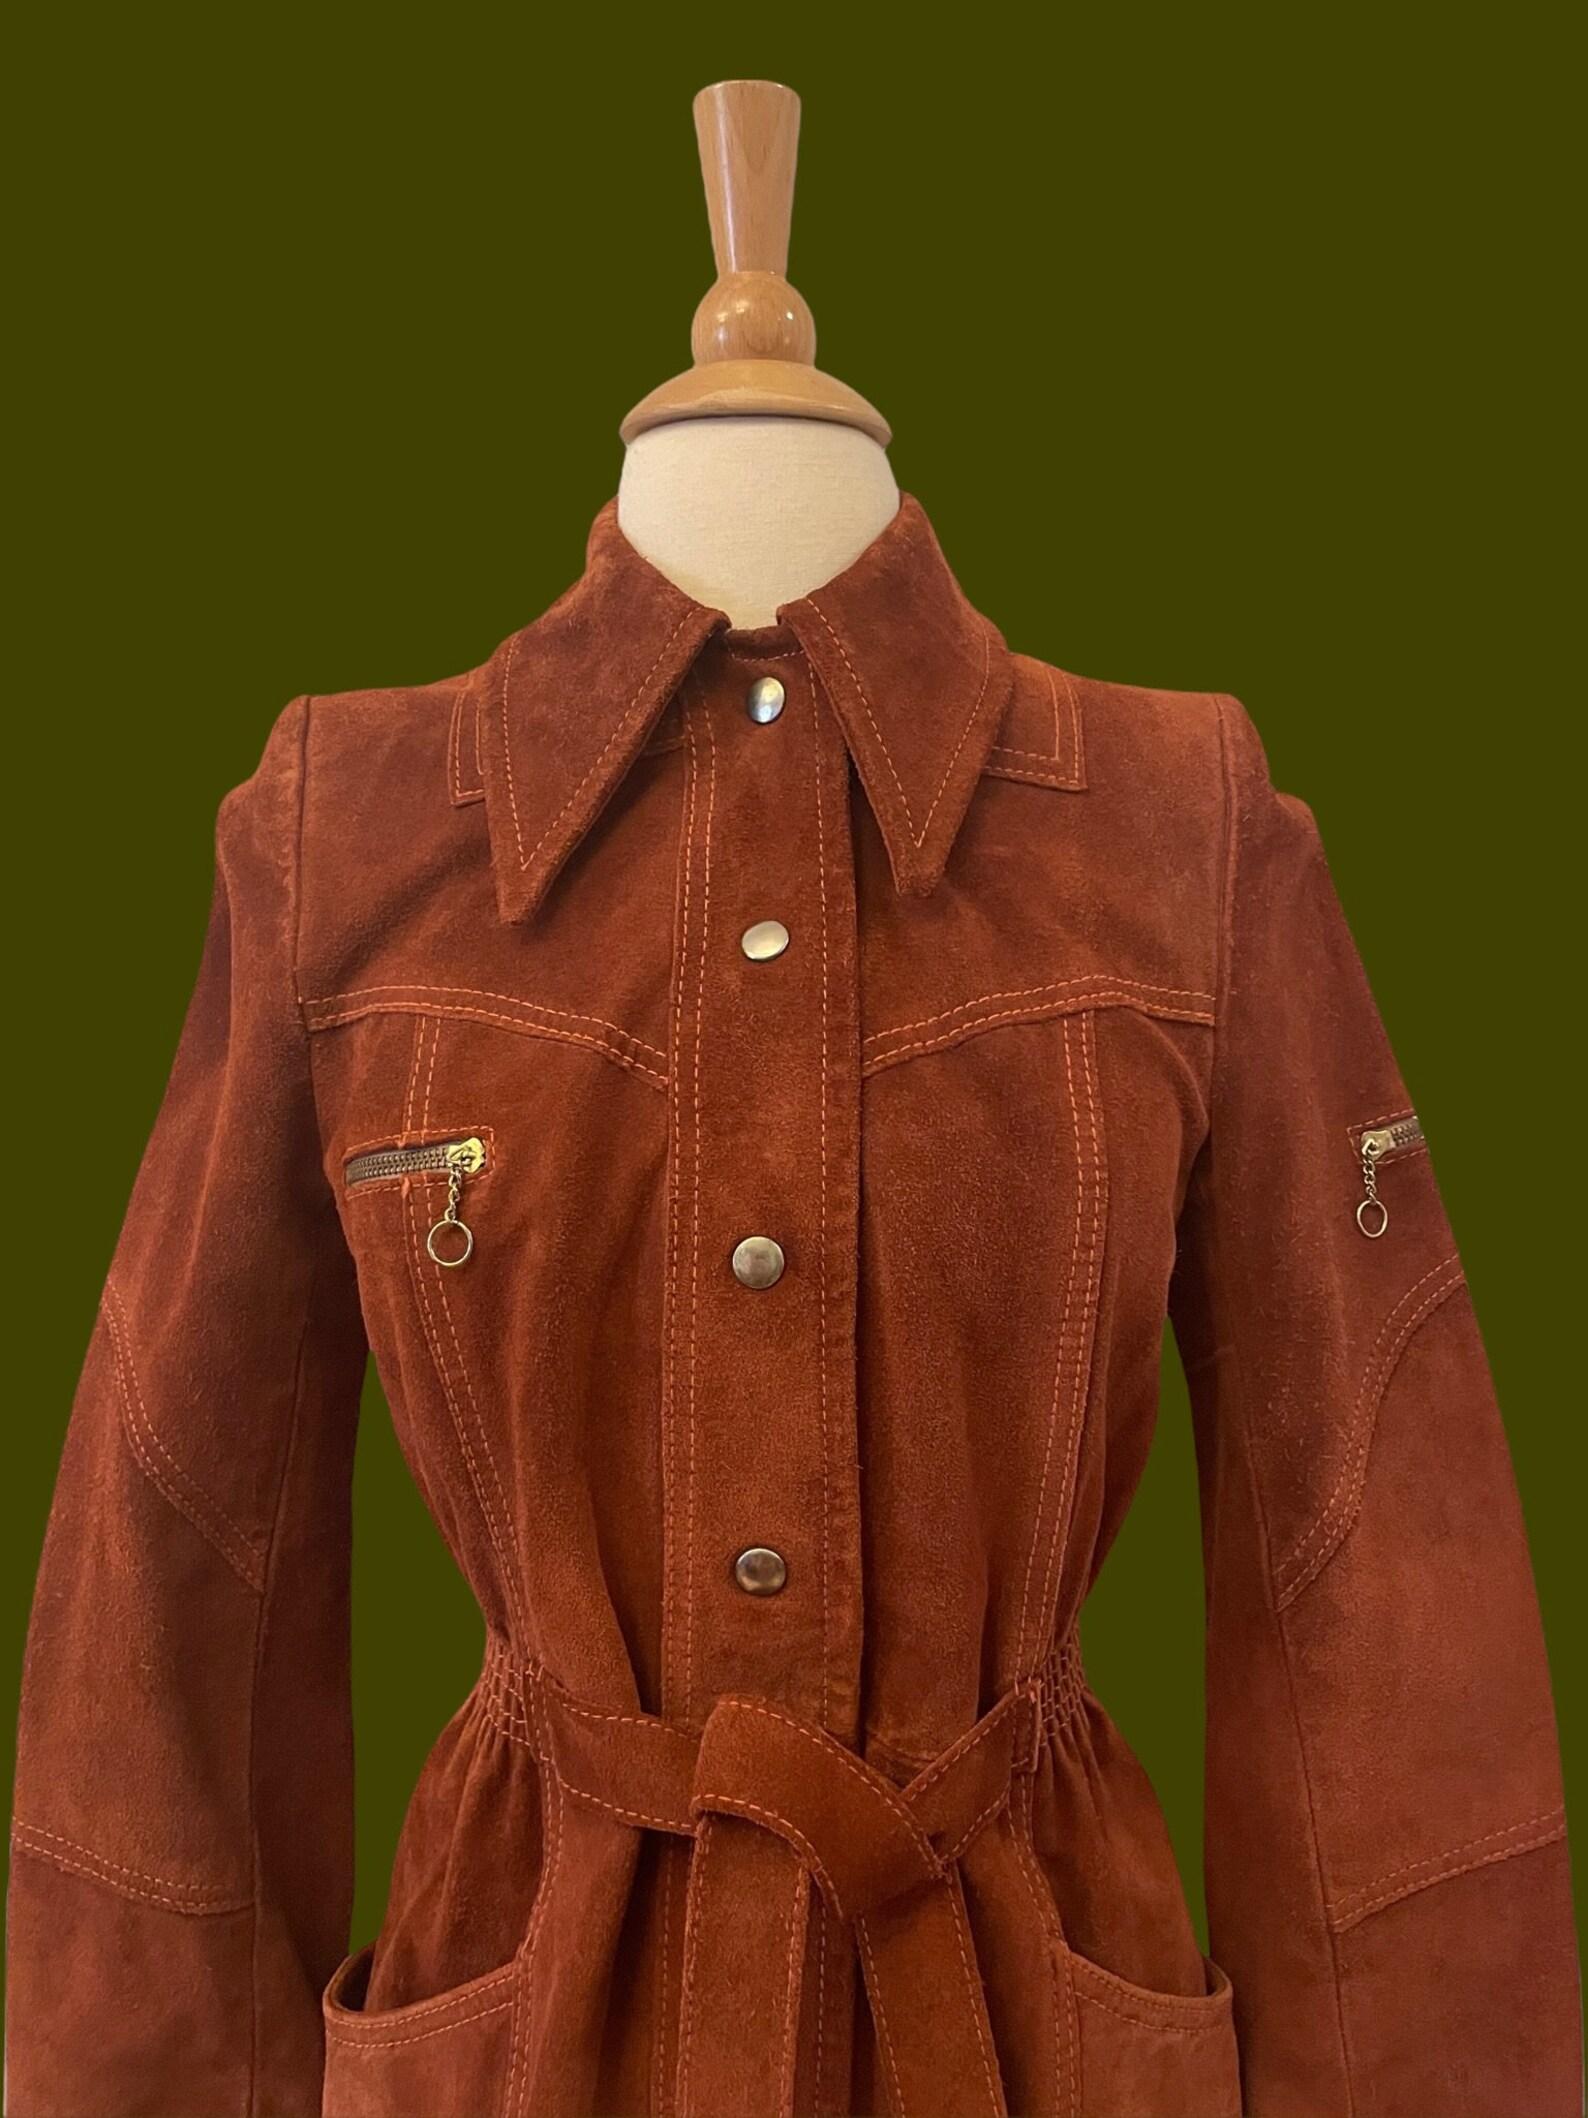 Rust Brown Suede Jacket, Circa 1970s In Excellent Condition For Sale In Brooklyn, NY